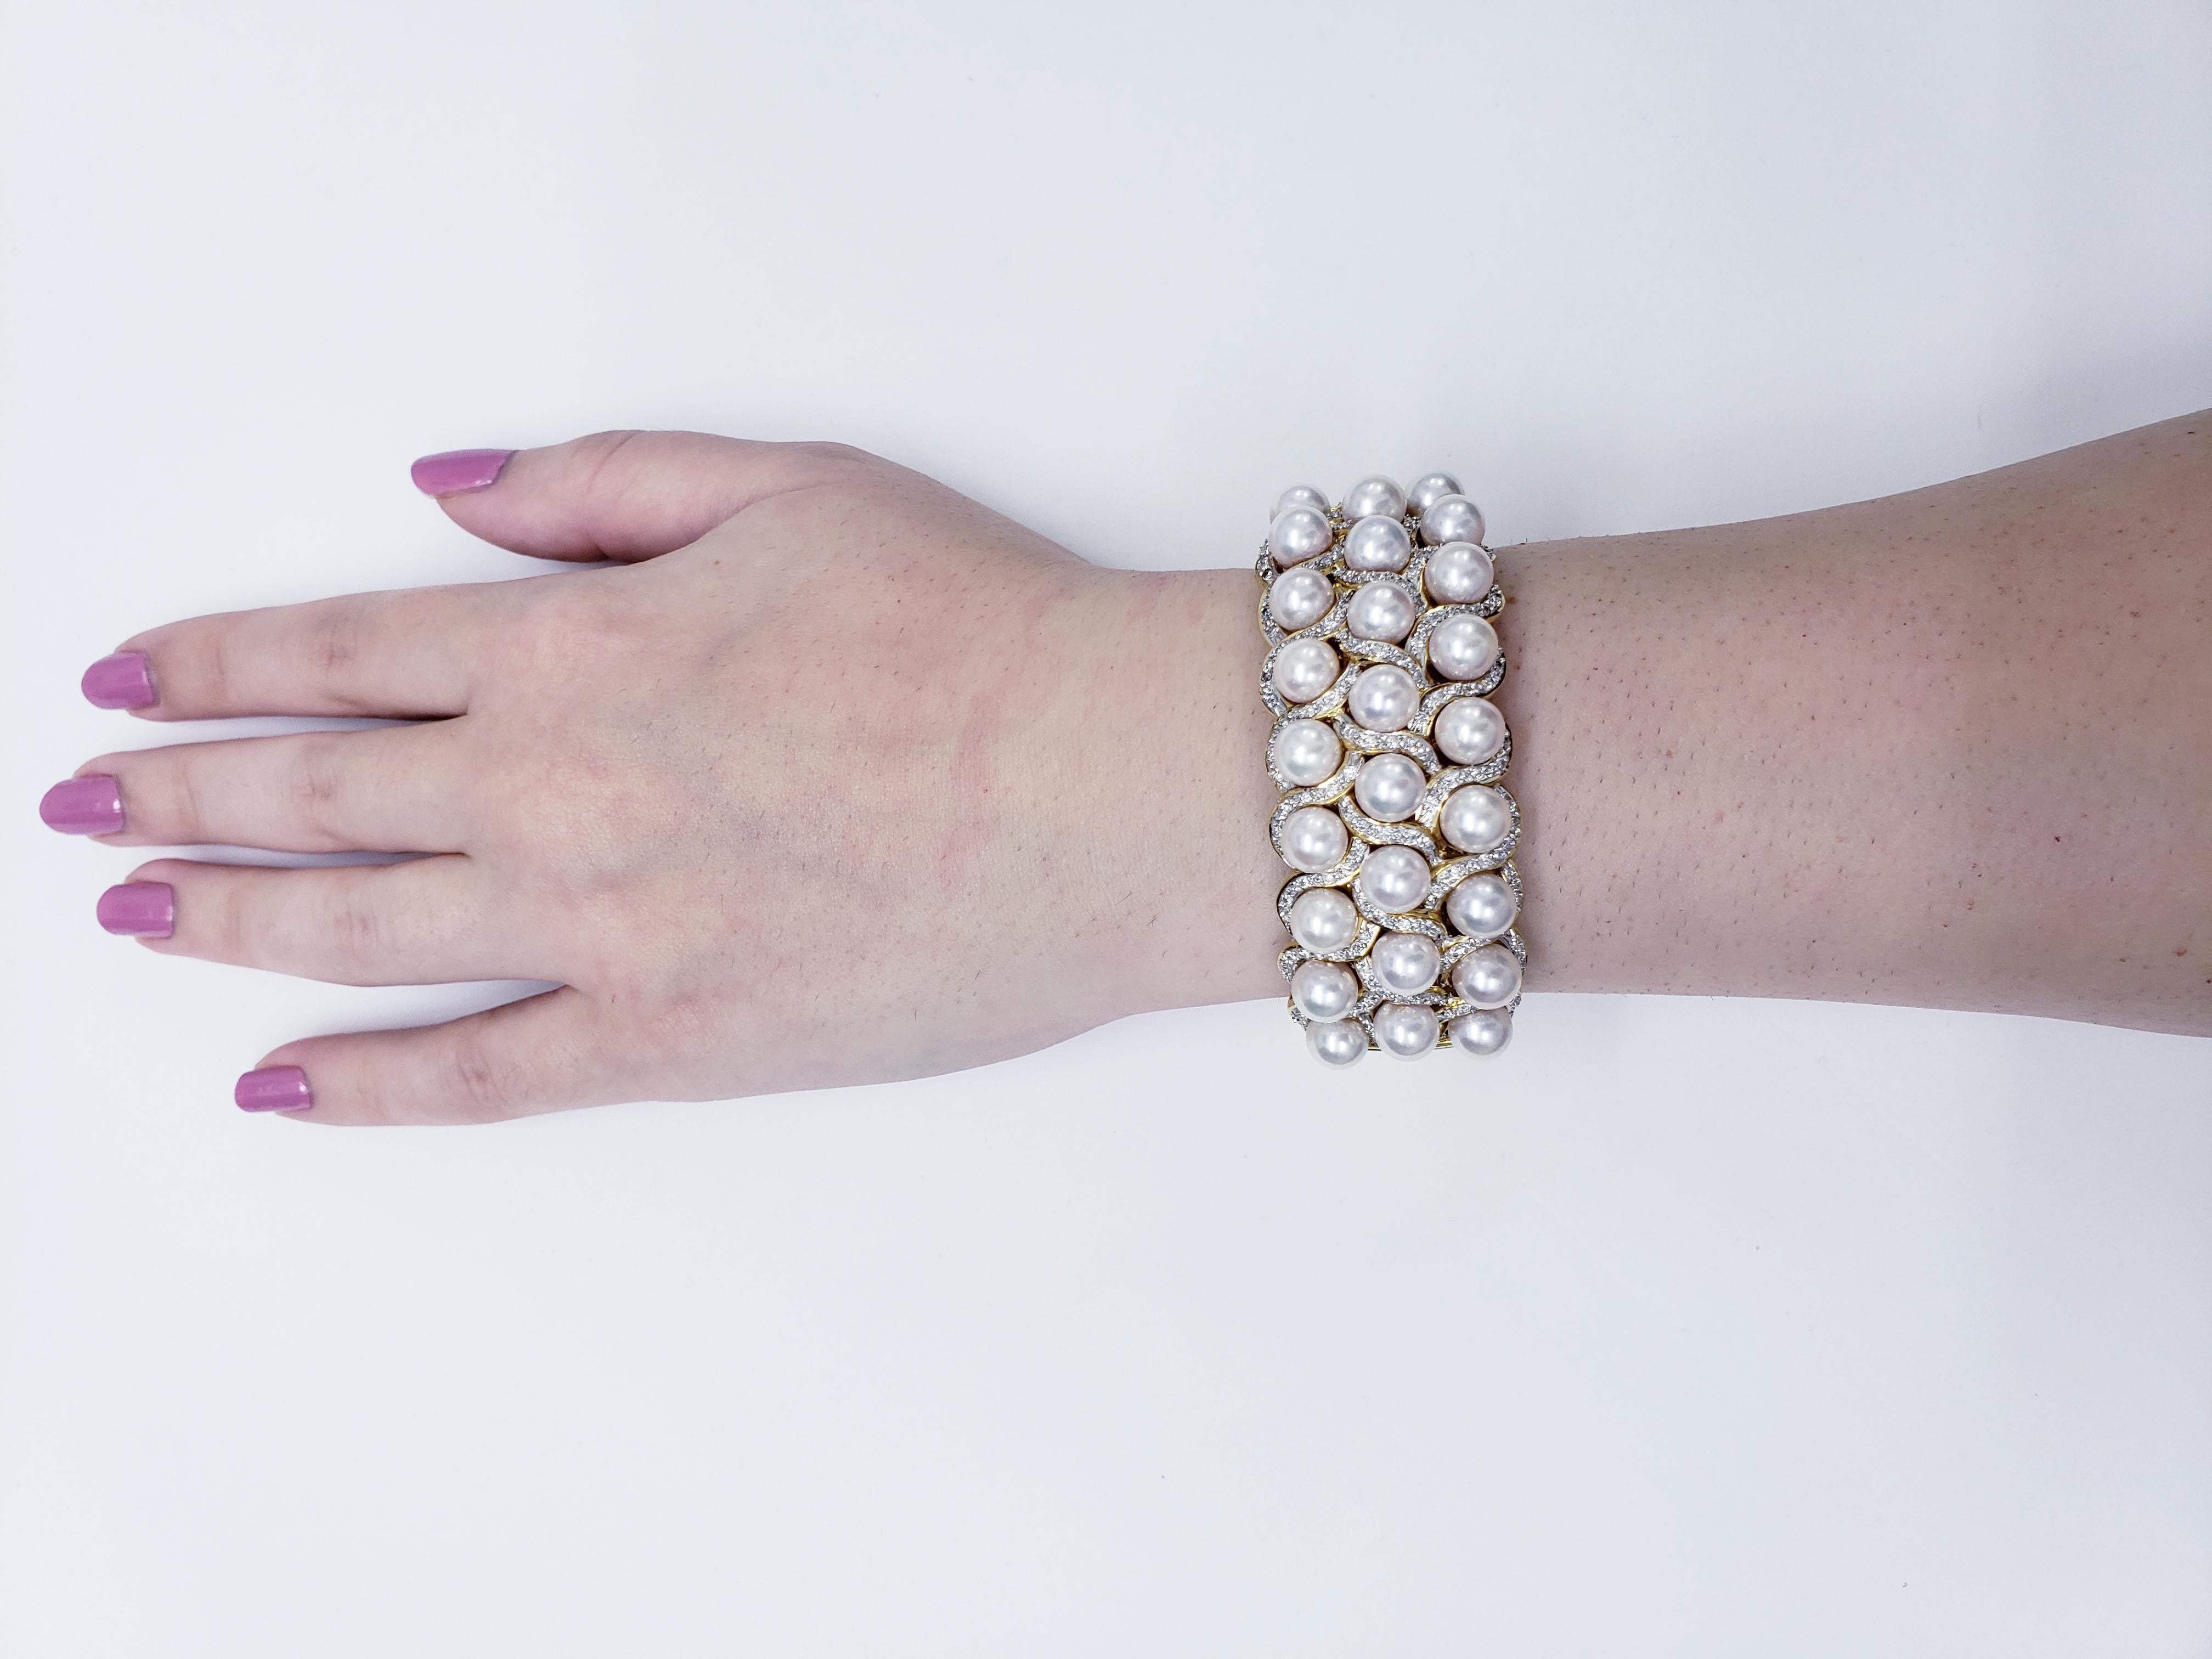 Round Cut Midcentury Outstanding Luxury Diamonds and Pearls Bangle Handcrafted in 18k Gold For Sale